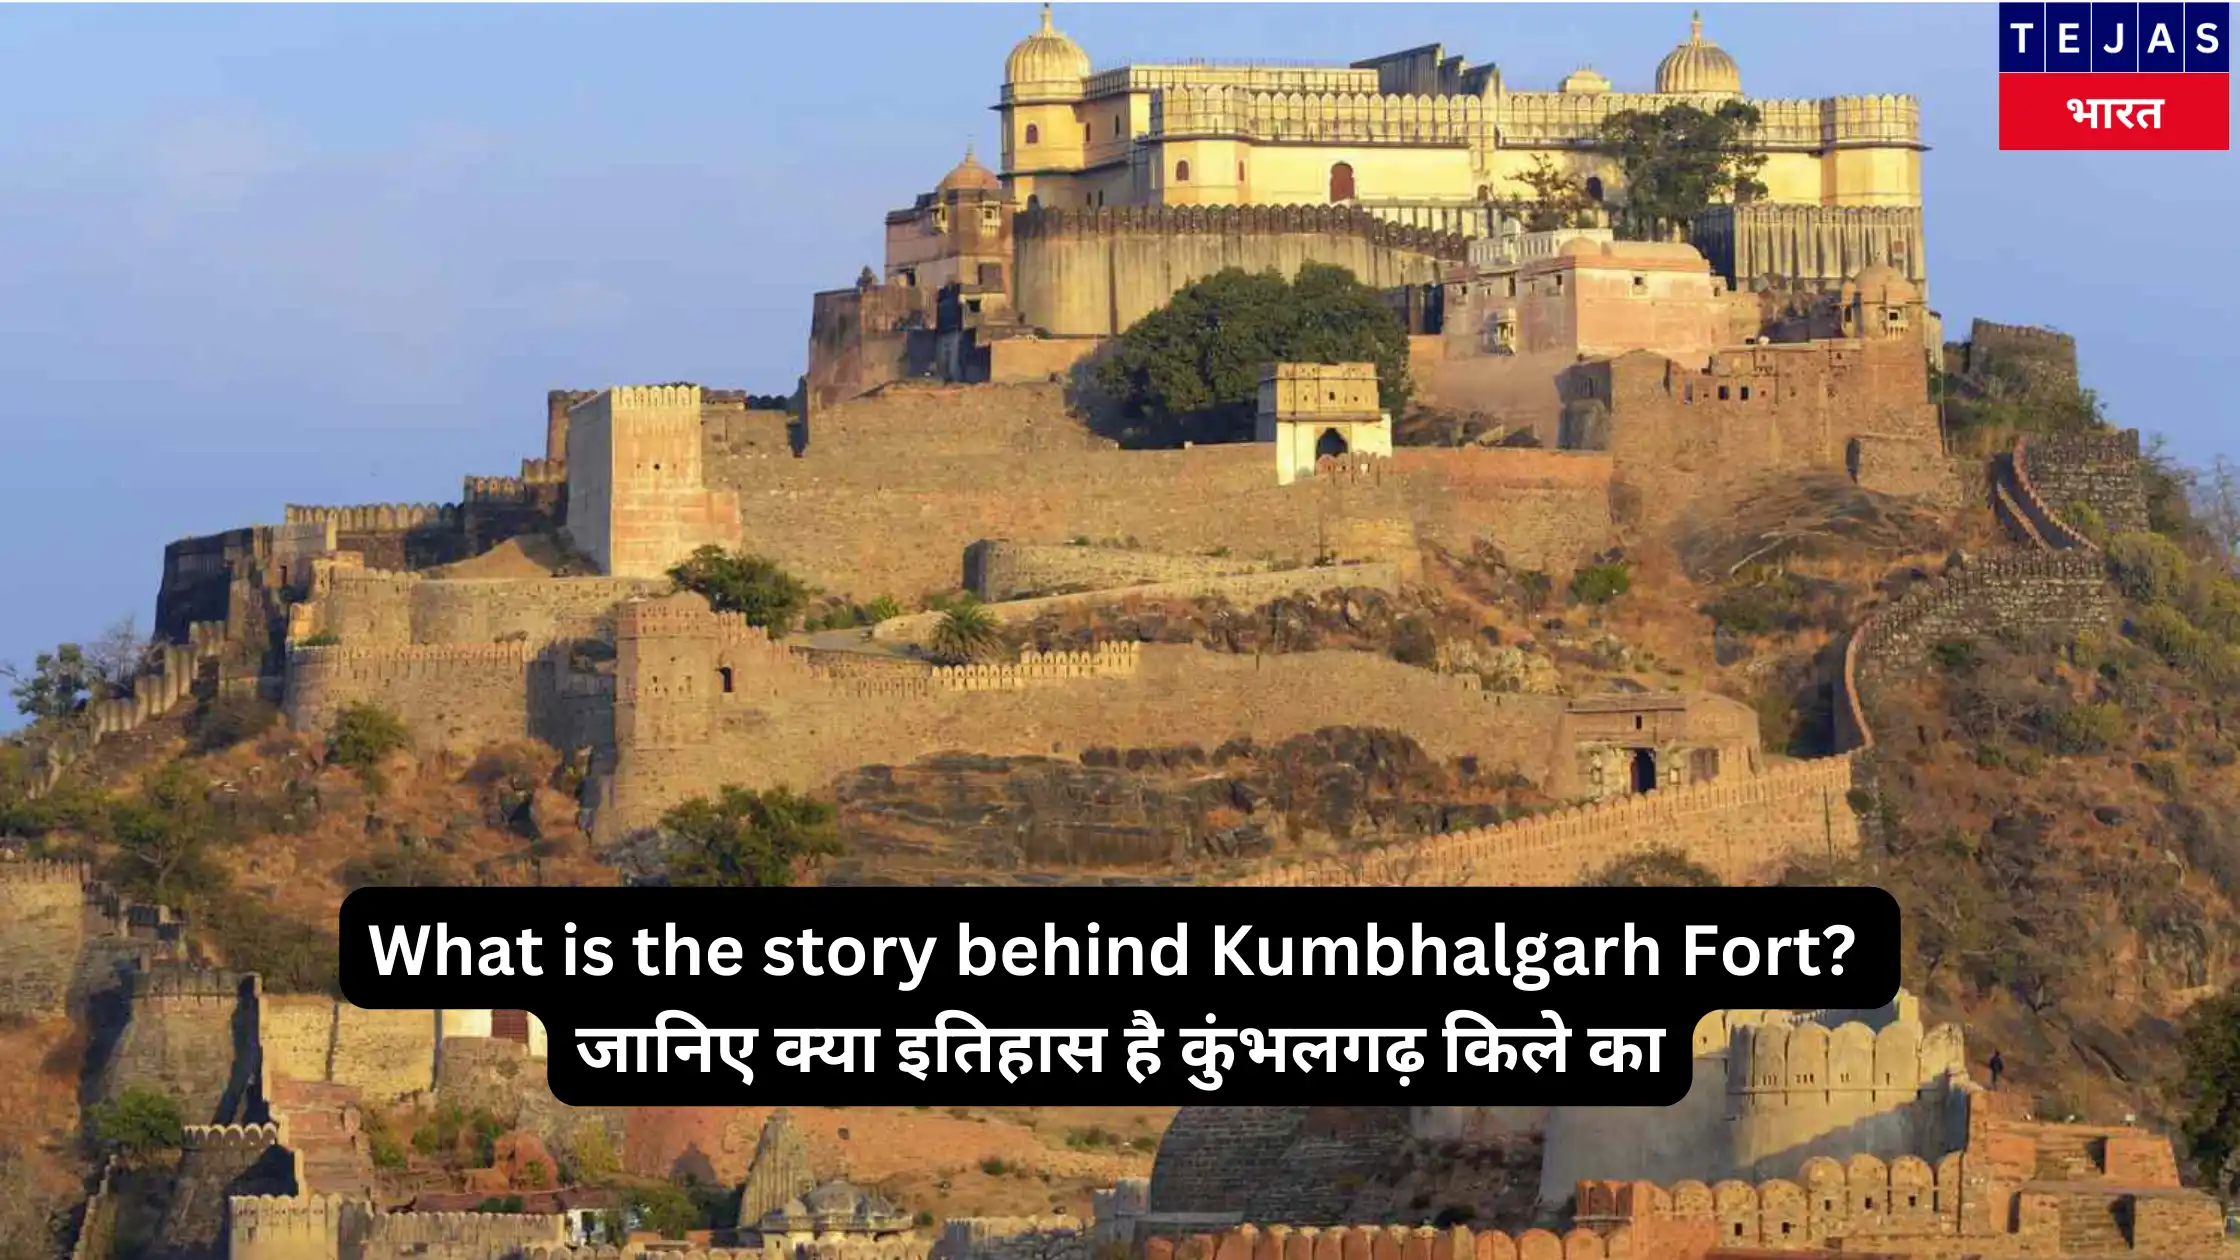 What is the story behind Kumbhalgarh Fort?